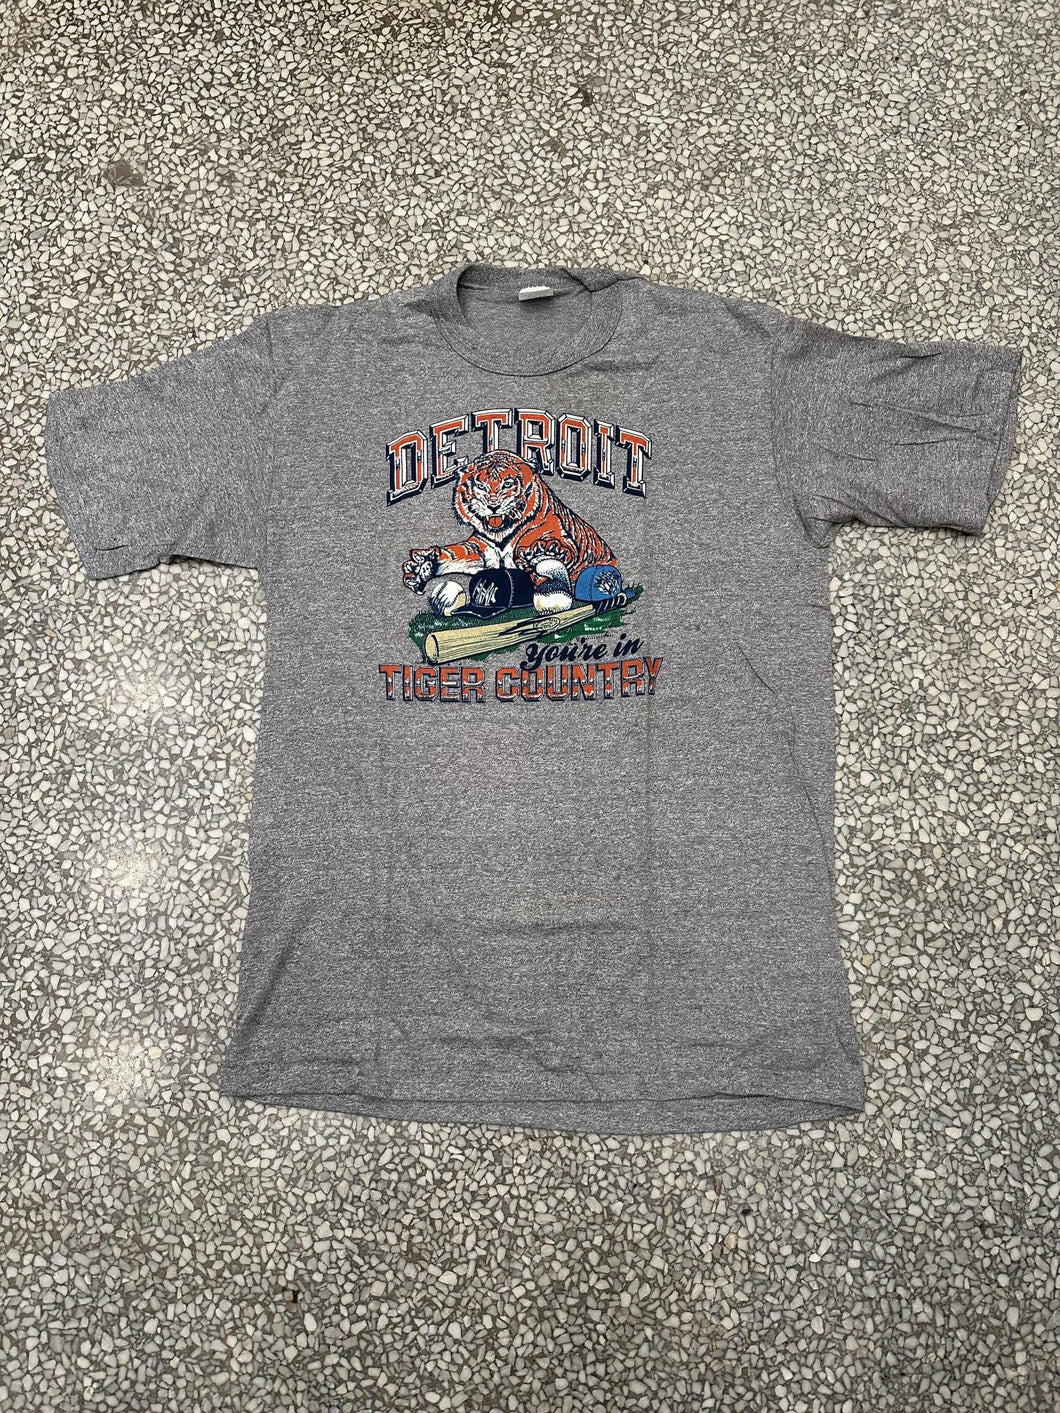 Detroit Tigers Vintage 80s You're In Tiger Country Paper Thin Grey ABC Vintage 